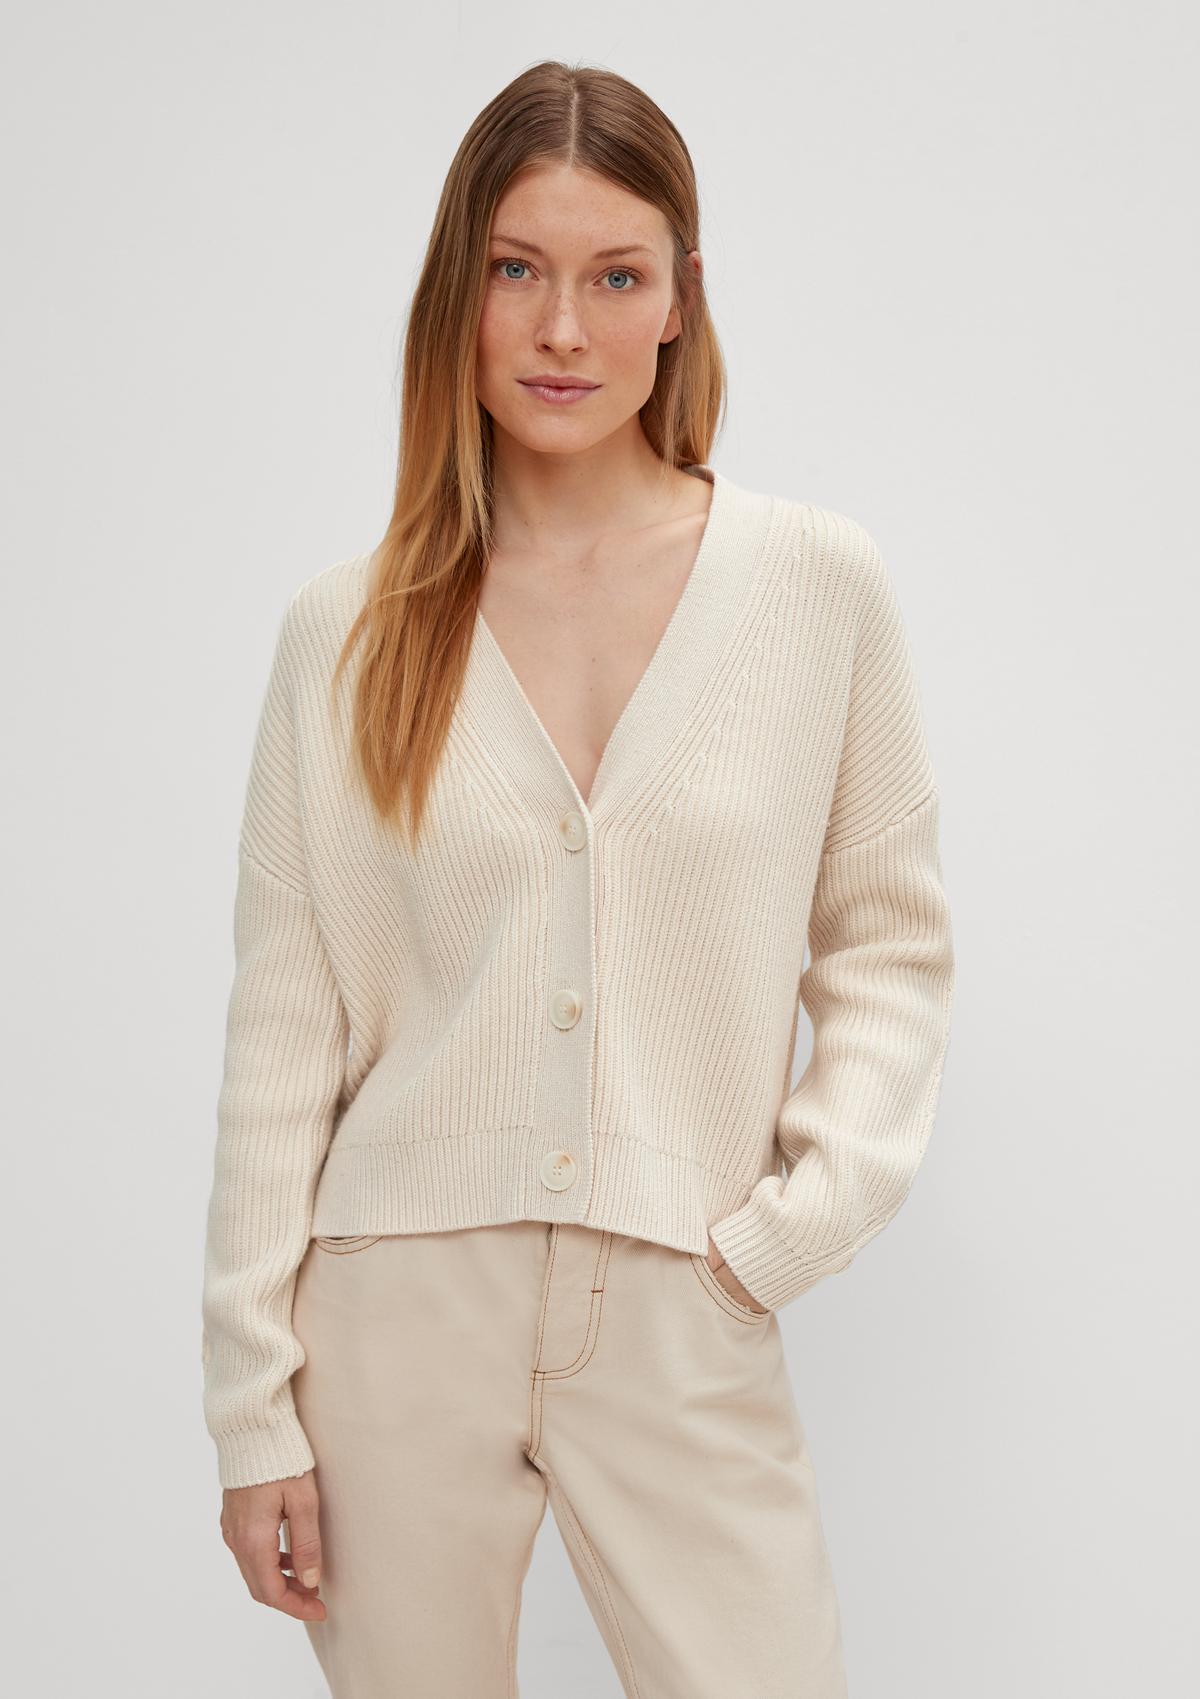 Cardigan with a knit cable Comma beige pattern | - light